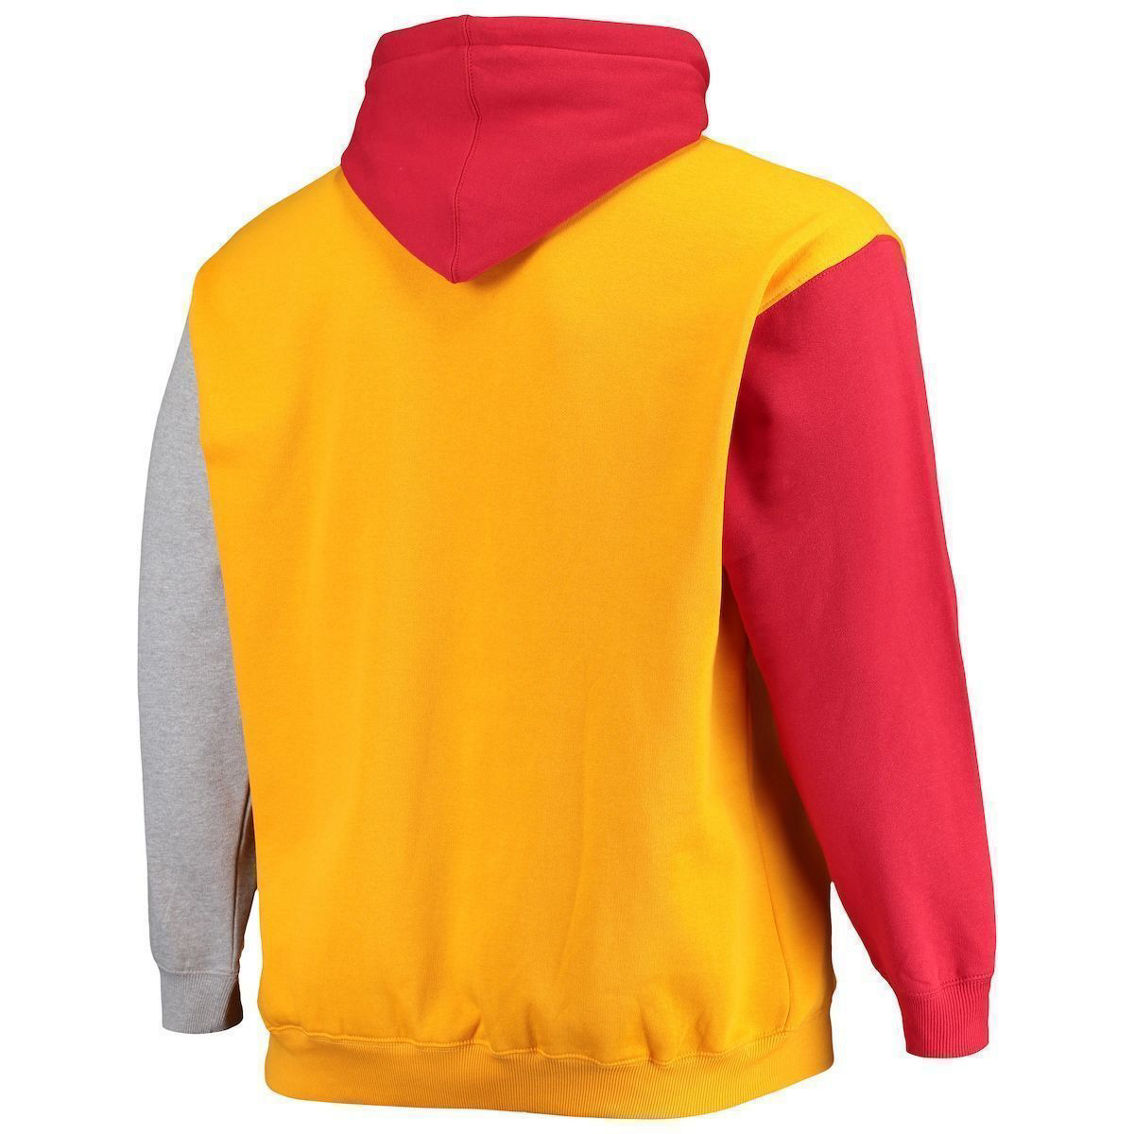 Fanatics Branded Men's Red/Yellow Kansas City Chiefs Big & Tall Pullover Hoodie - Image 4 of 4